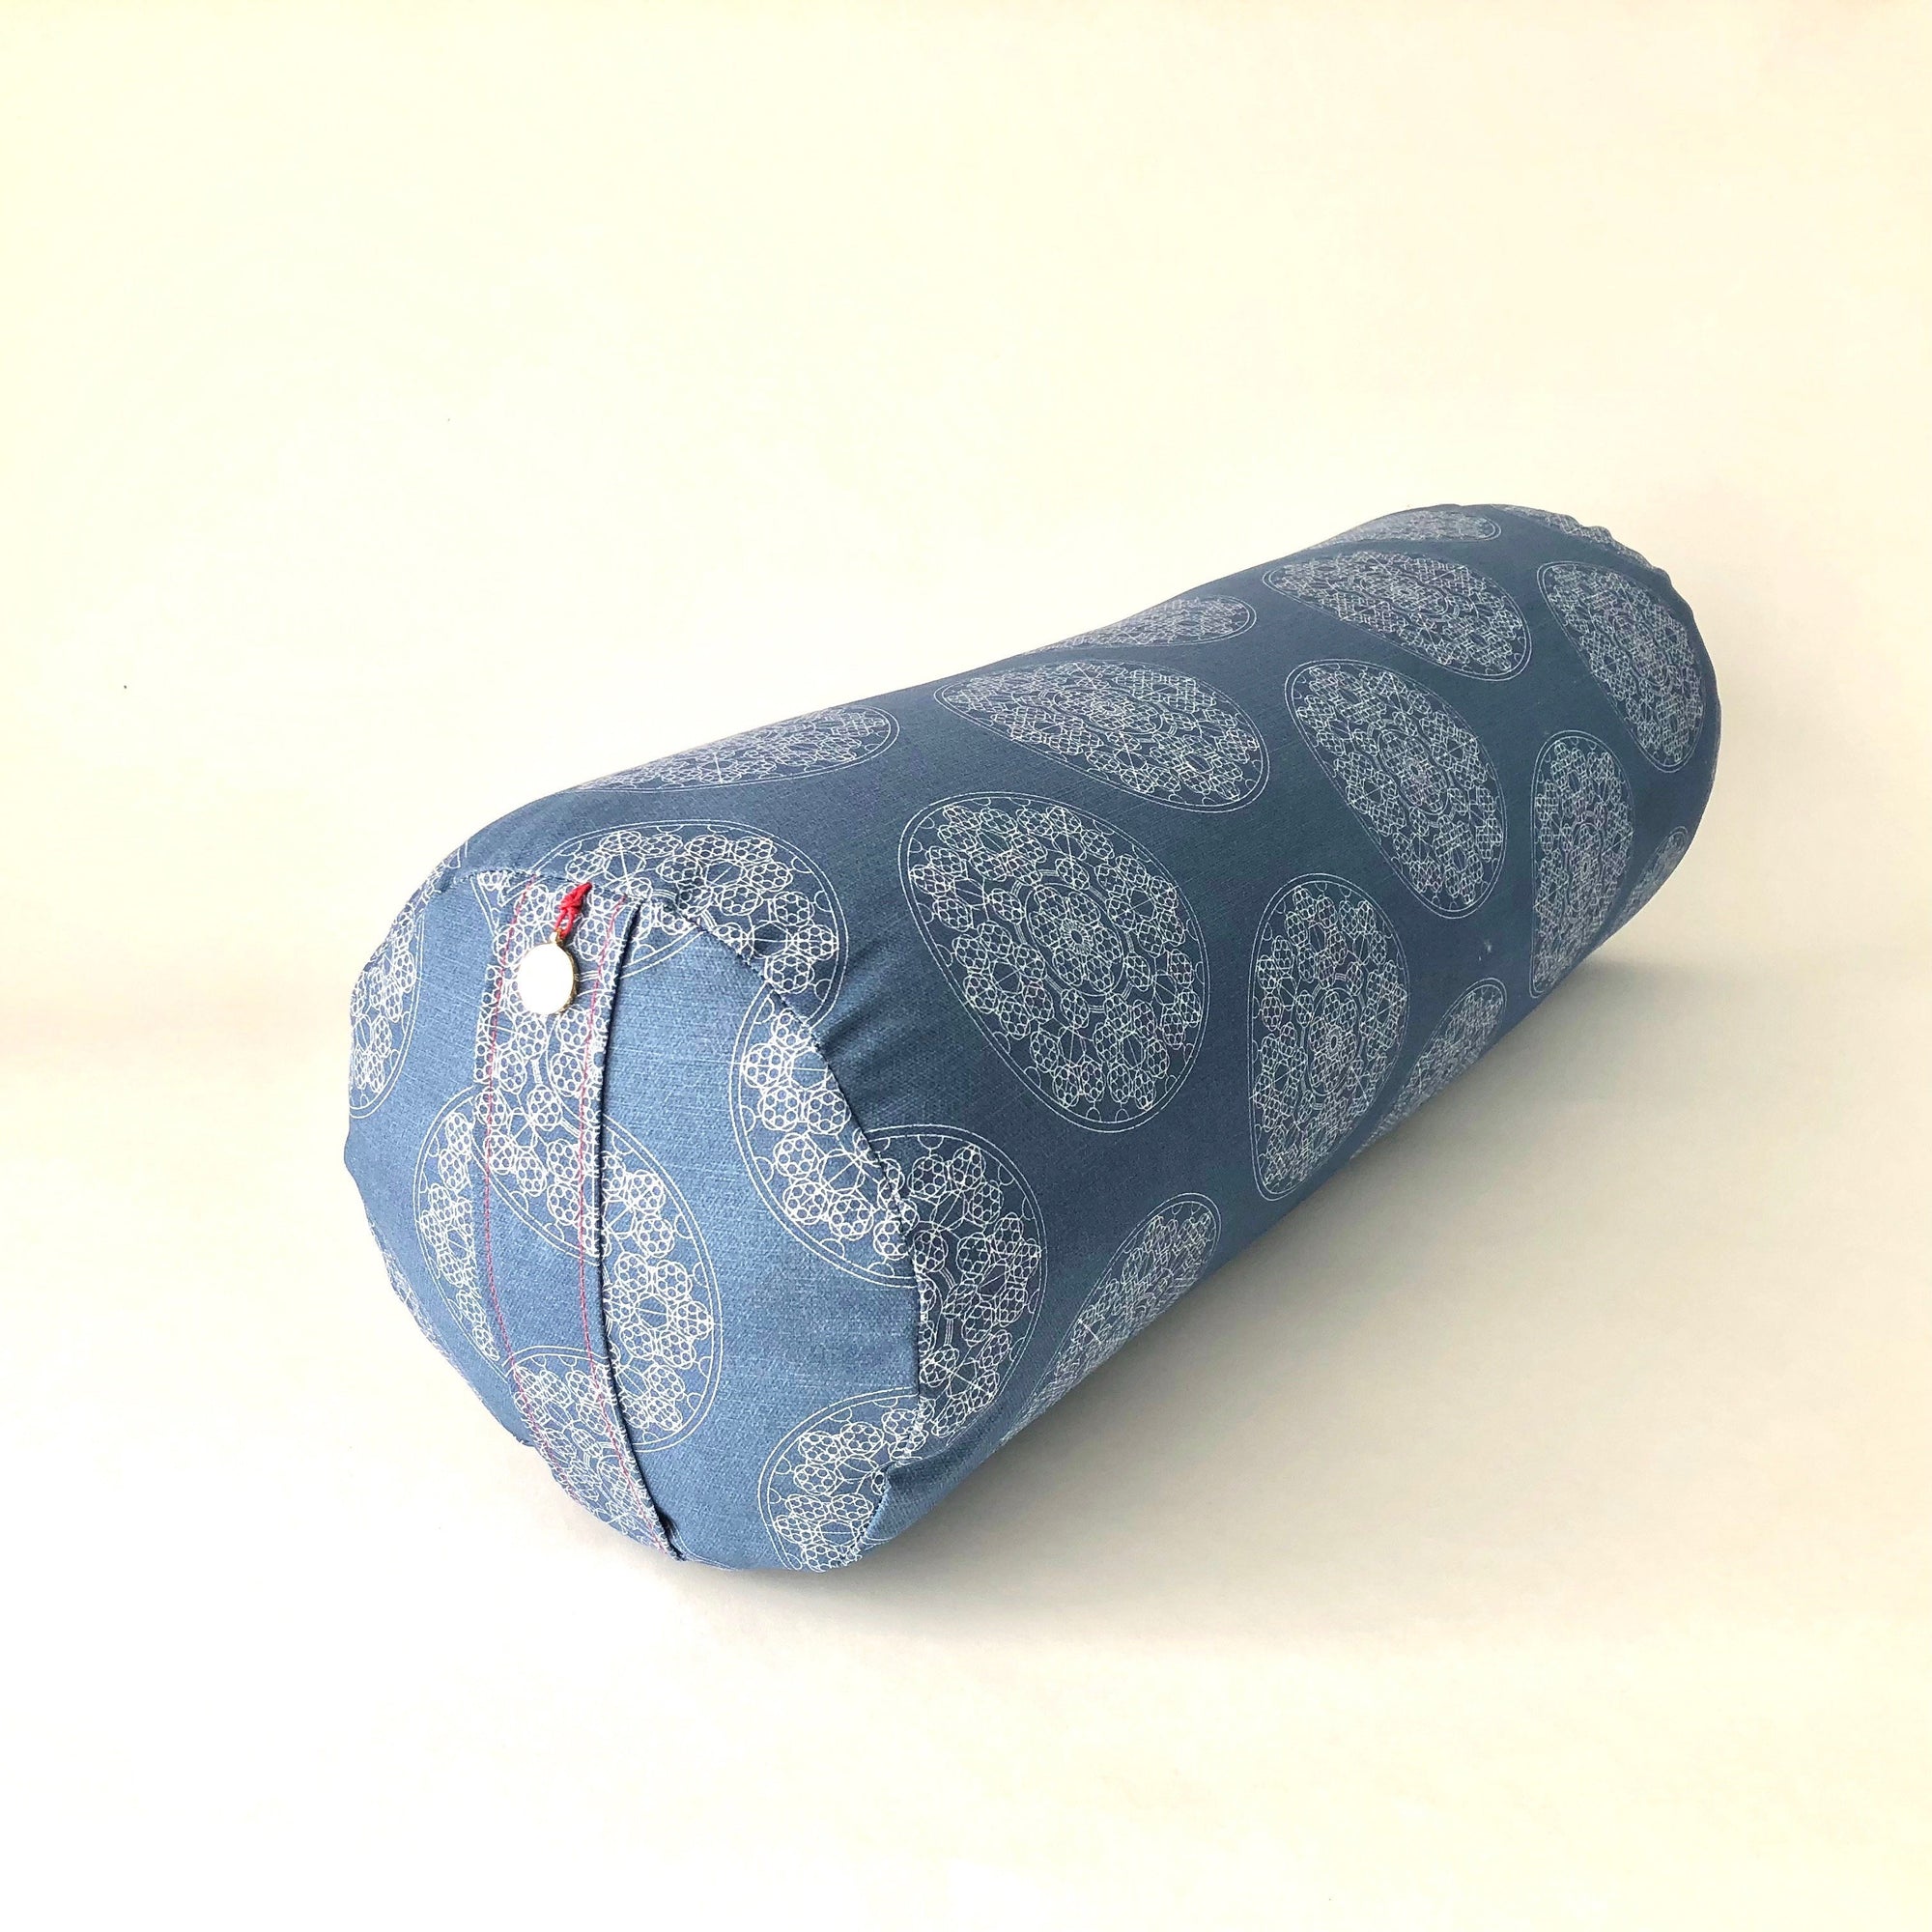 Solid Color Oval Yoga Bolster Pillow by Inner Space Supplies